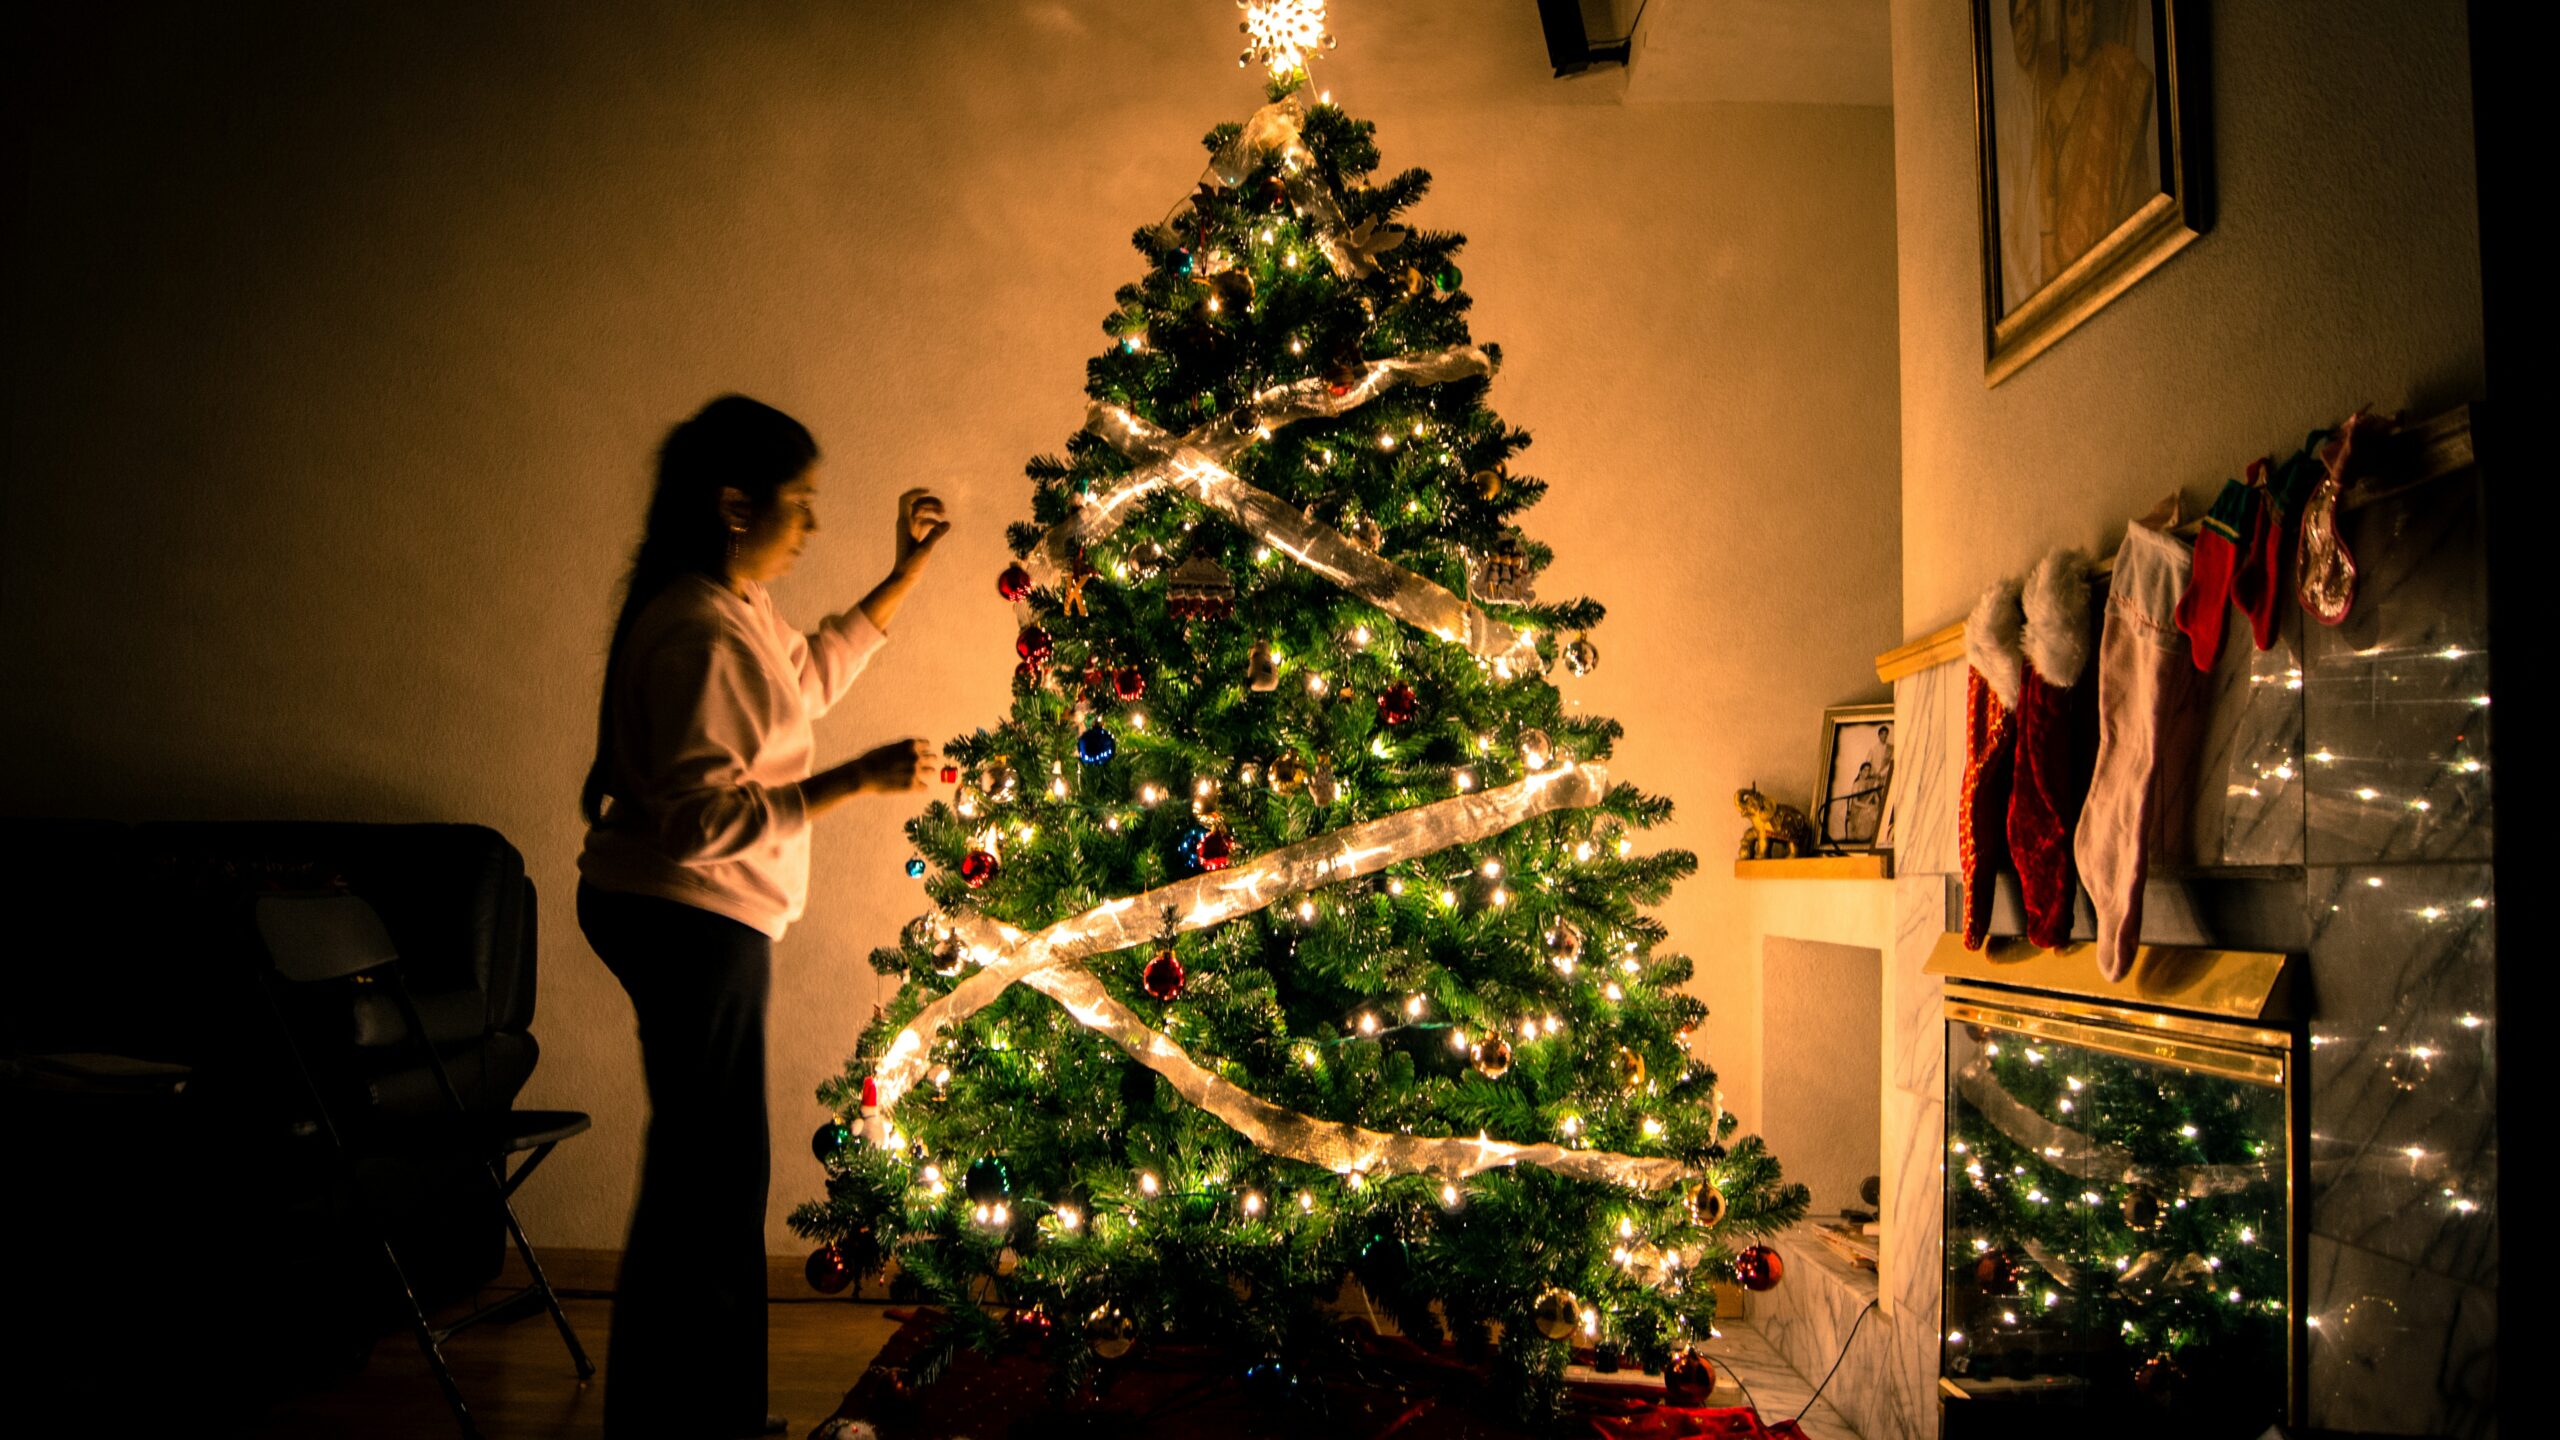 5 tips to keep things festive from afar